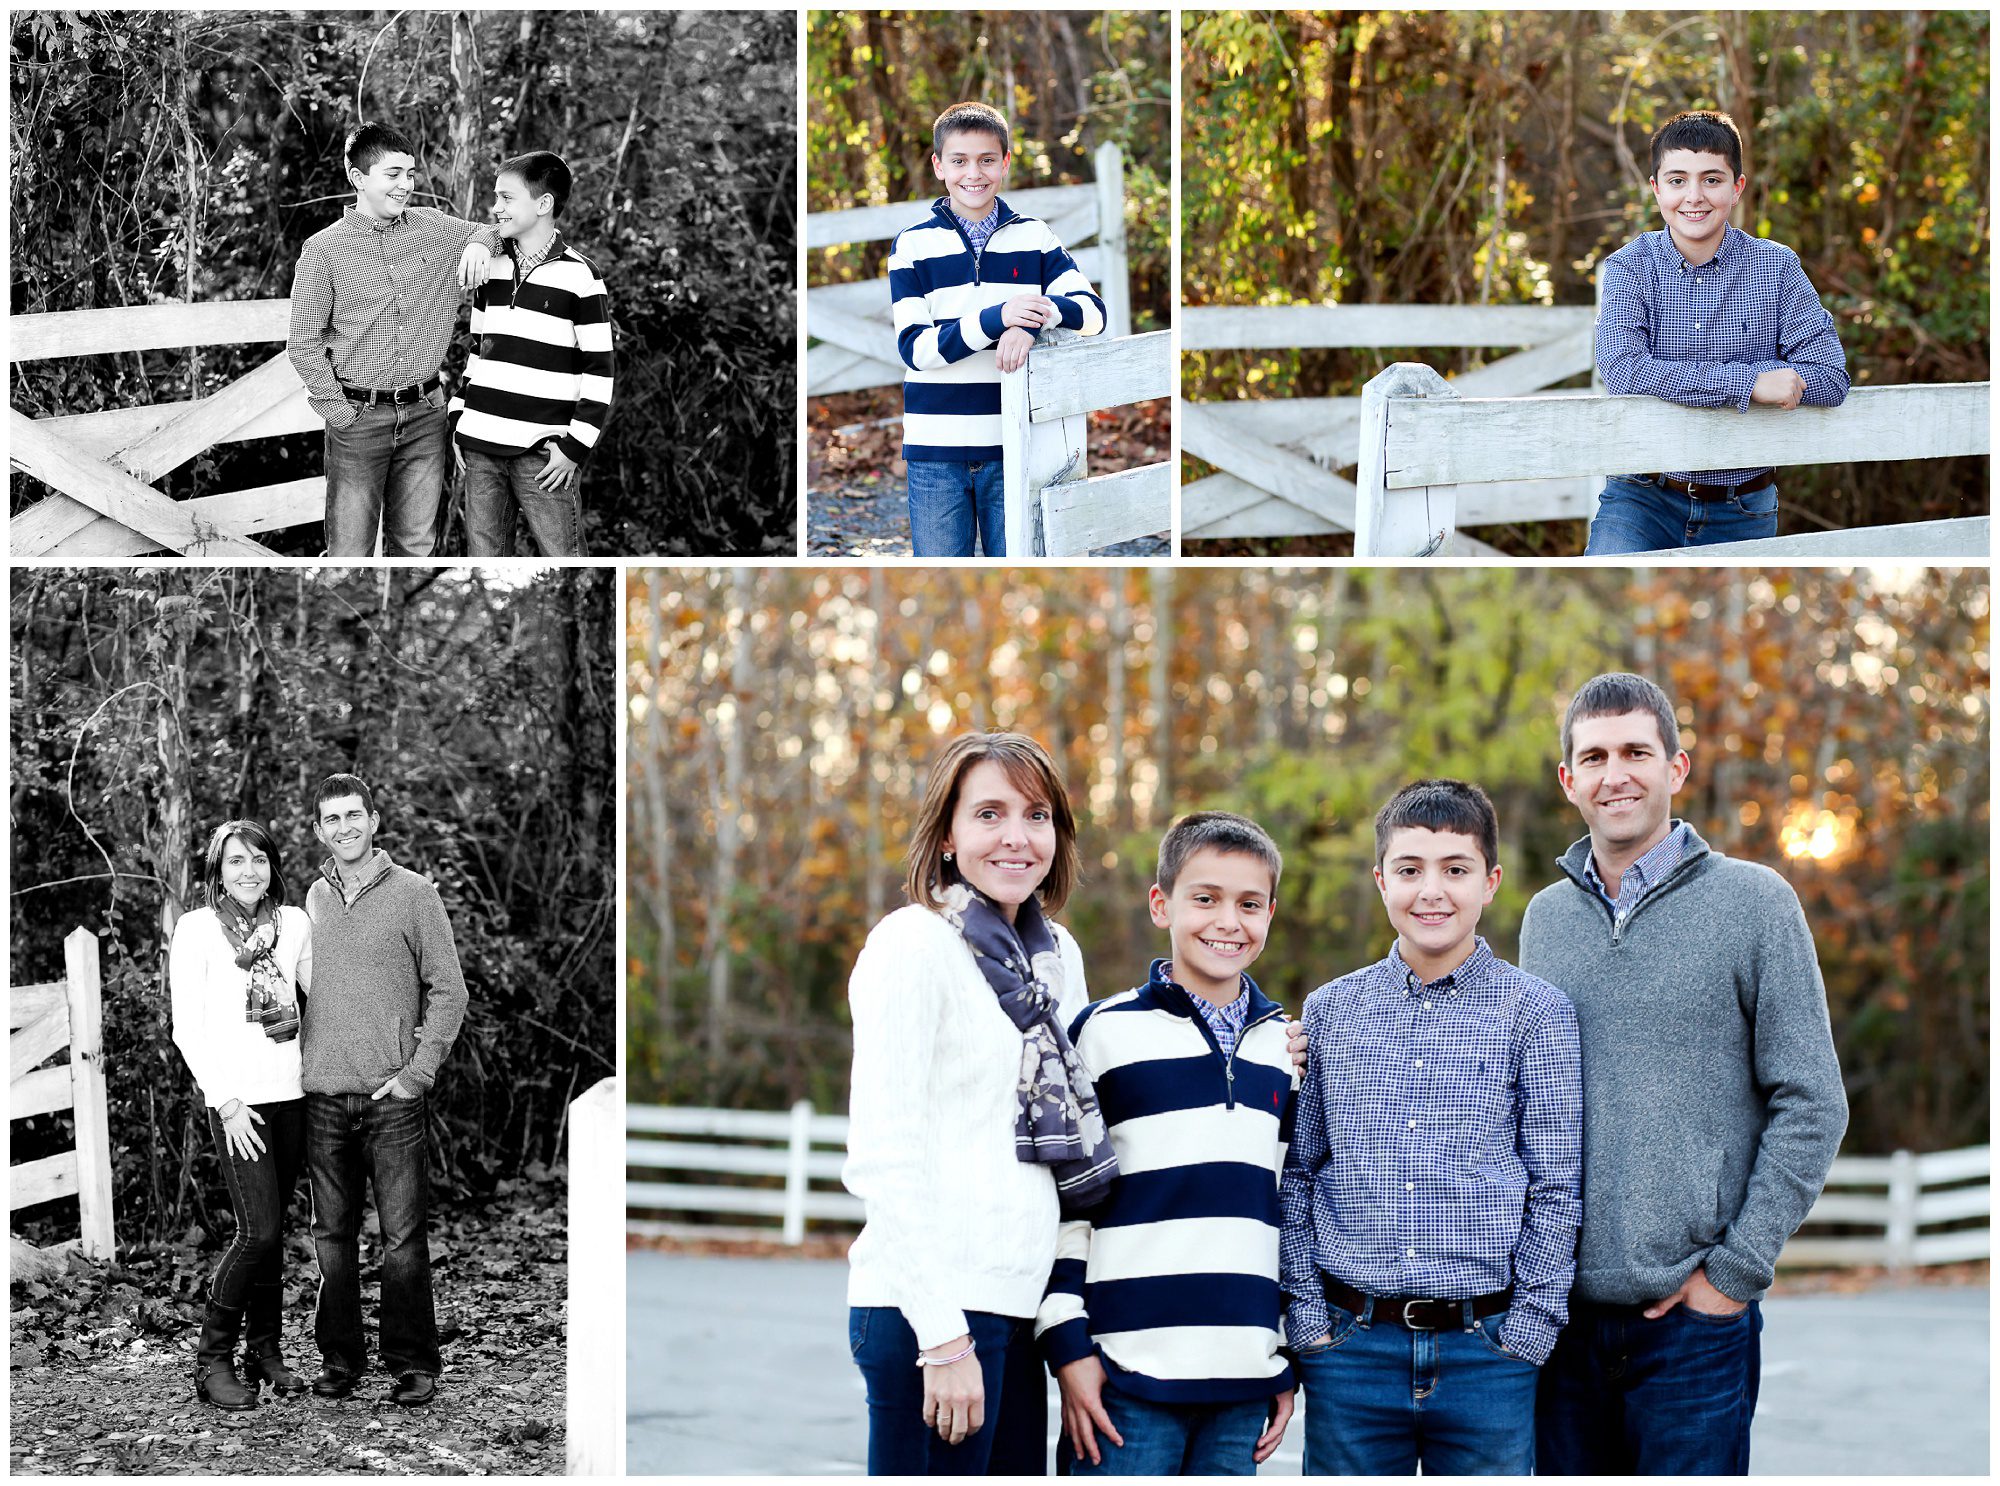 fluvanna extended family portraits palmyra fall autumn grandparents cousins charlottesville cville brothers albermarle photographer pictures session